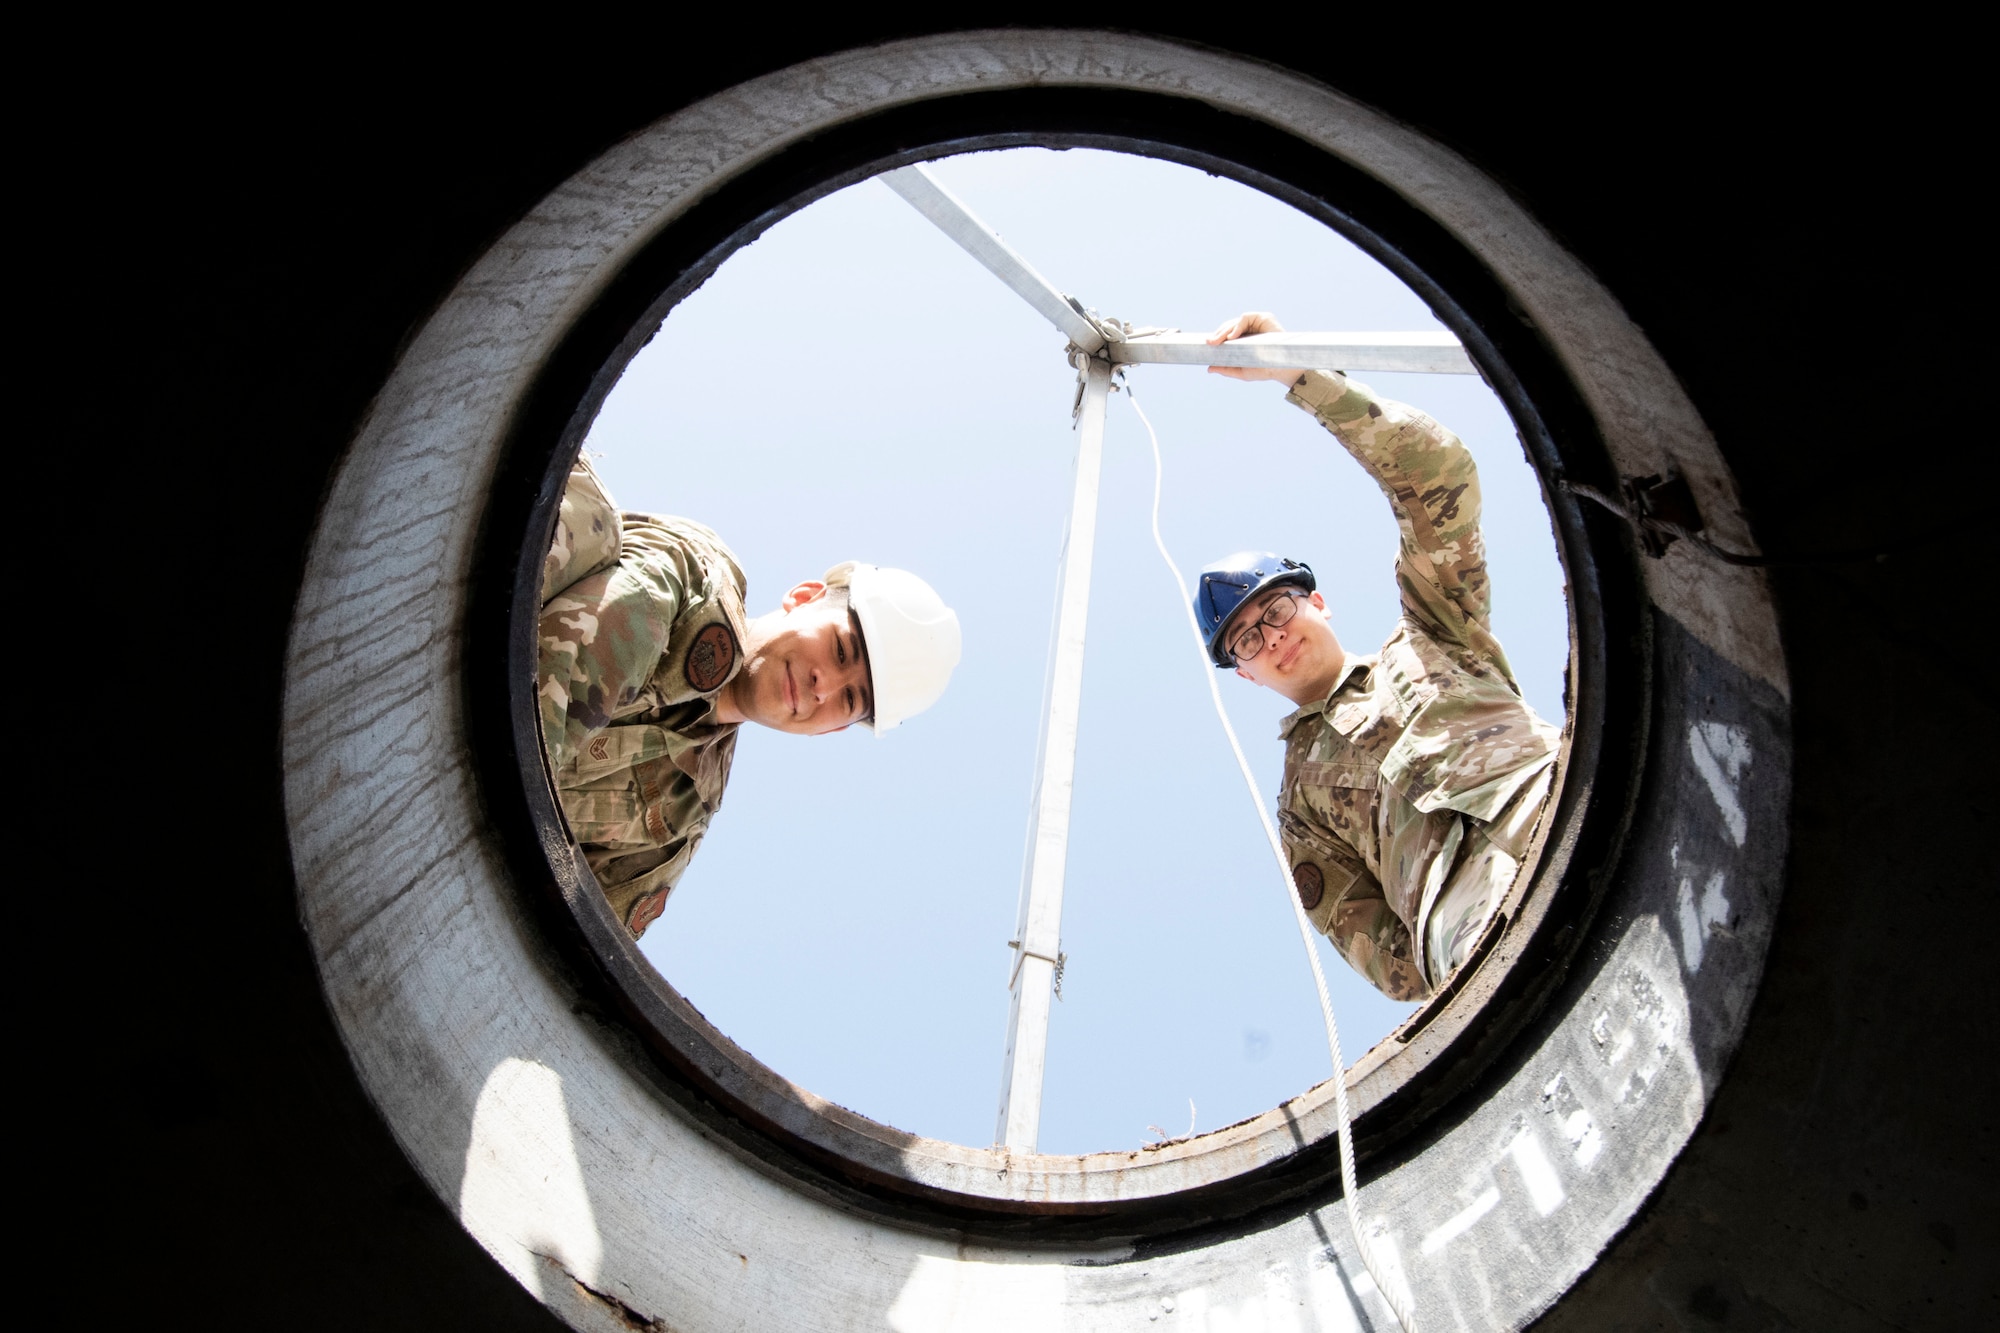 U.S. Air Force Staff Sgt. Alan Hooper, 39th Communications Squadron cable maintenance supervisor, (left), and Senior Airman Jacob Glass, 39th CS cable and antenna systems technician, stare down a manhole May 20, 2020, at Incirlik Air Base, Turkey.  Cable and antenna systems Airmen, popularly called “cable dawgs,” maintain and install cables on telecommunications towers and underground vaults or maintenance holes. (U.S. Air Force photo by Staff Sgt. Joshua Magbanua)